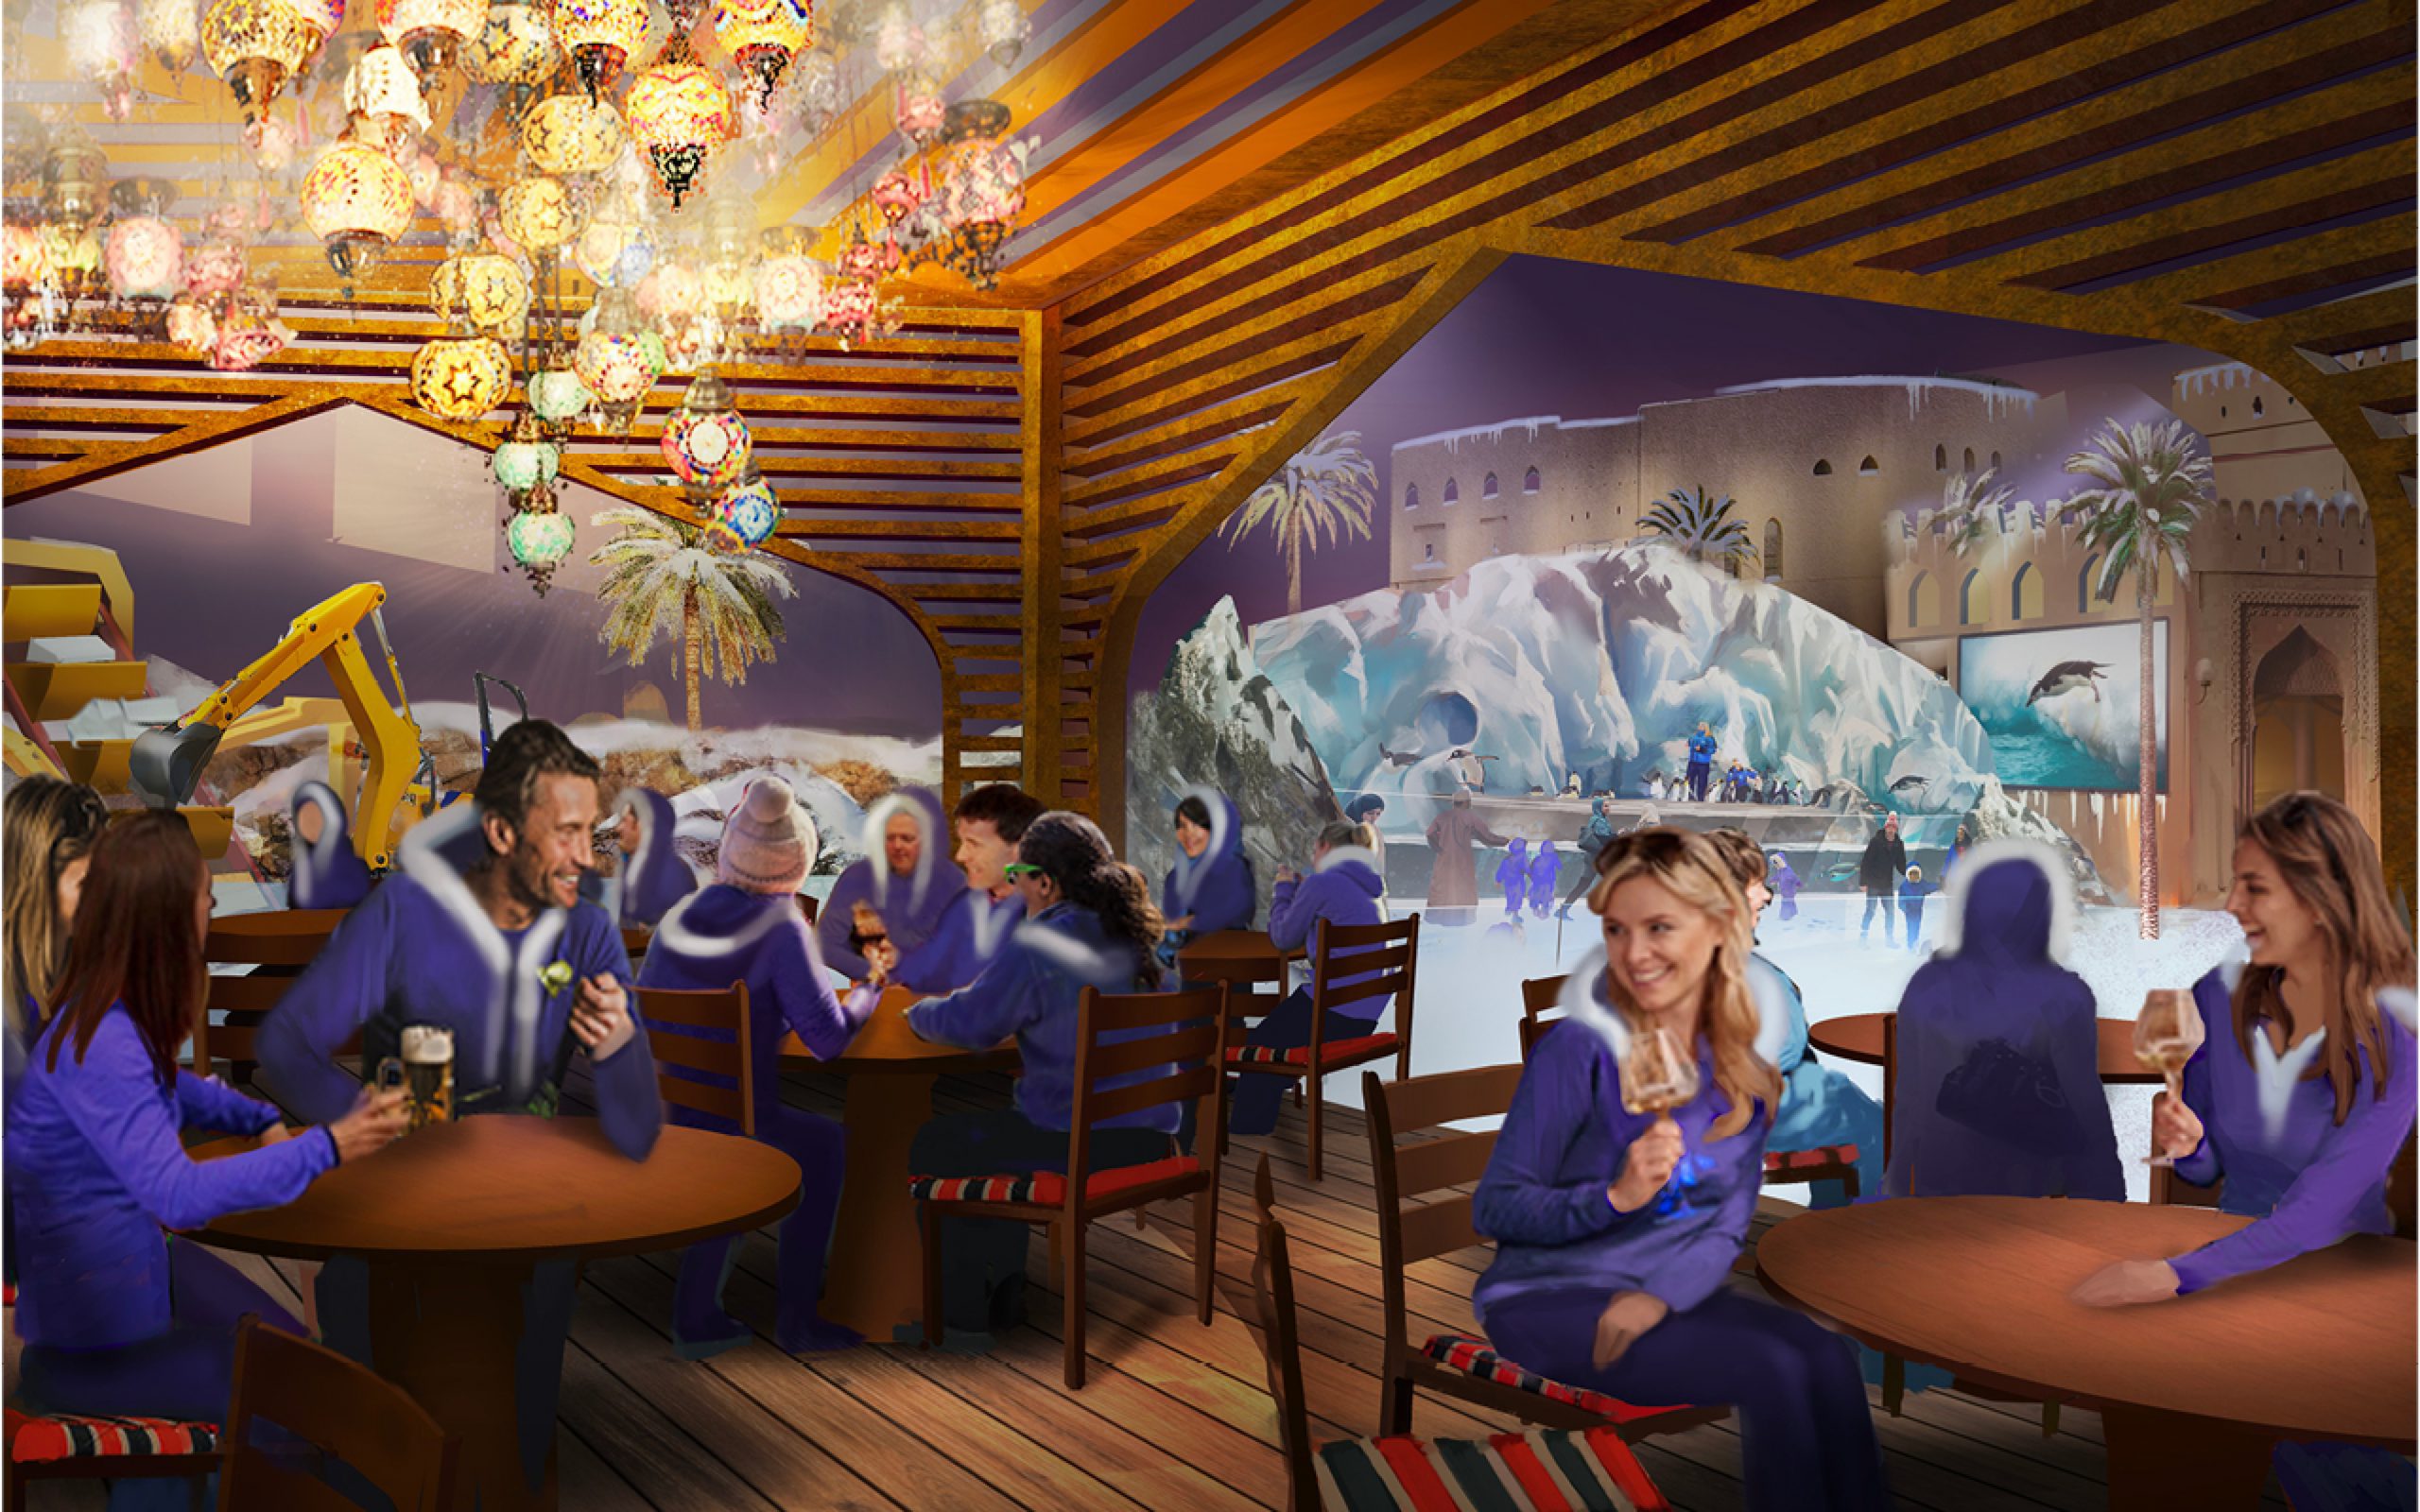 Concept image of a winter themed dining area